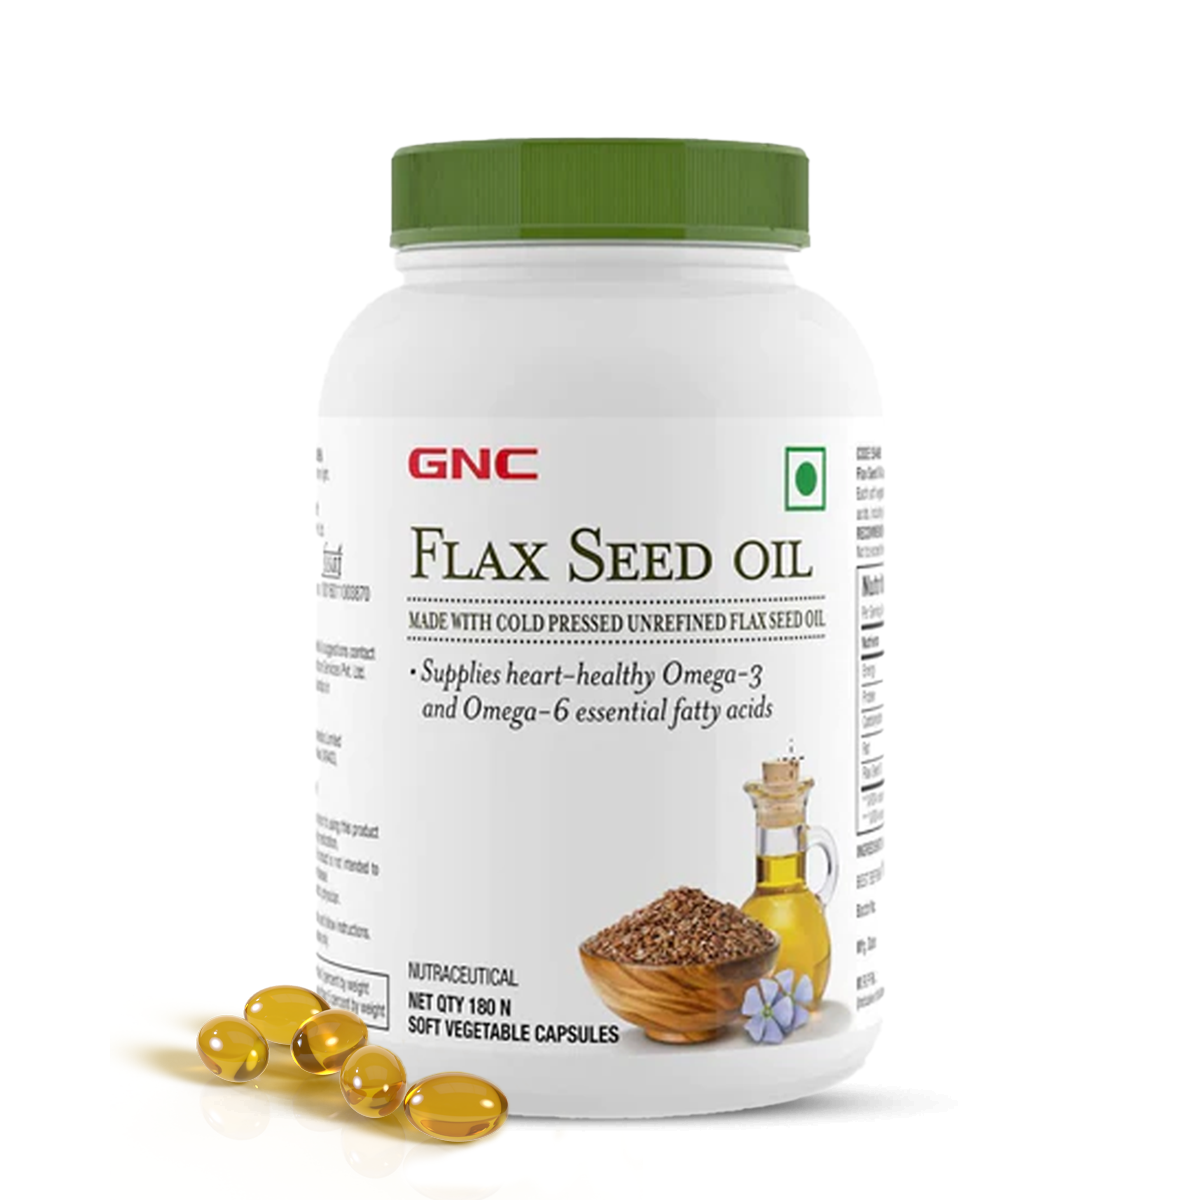 GNC Flax Seed Oil -   1000mg - Vegetarian Omega 3 & 6 Capsules for Overall Well-Being